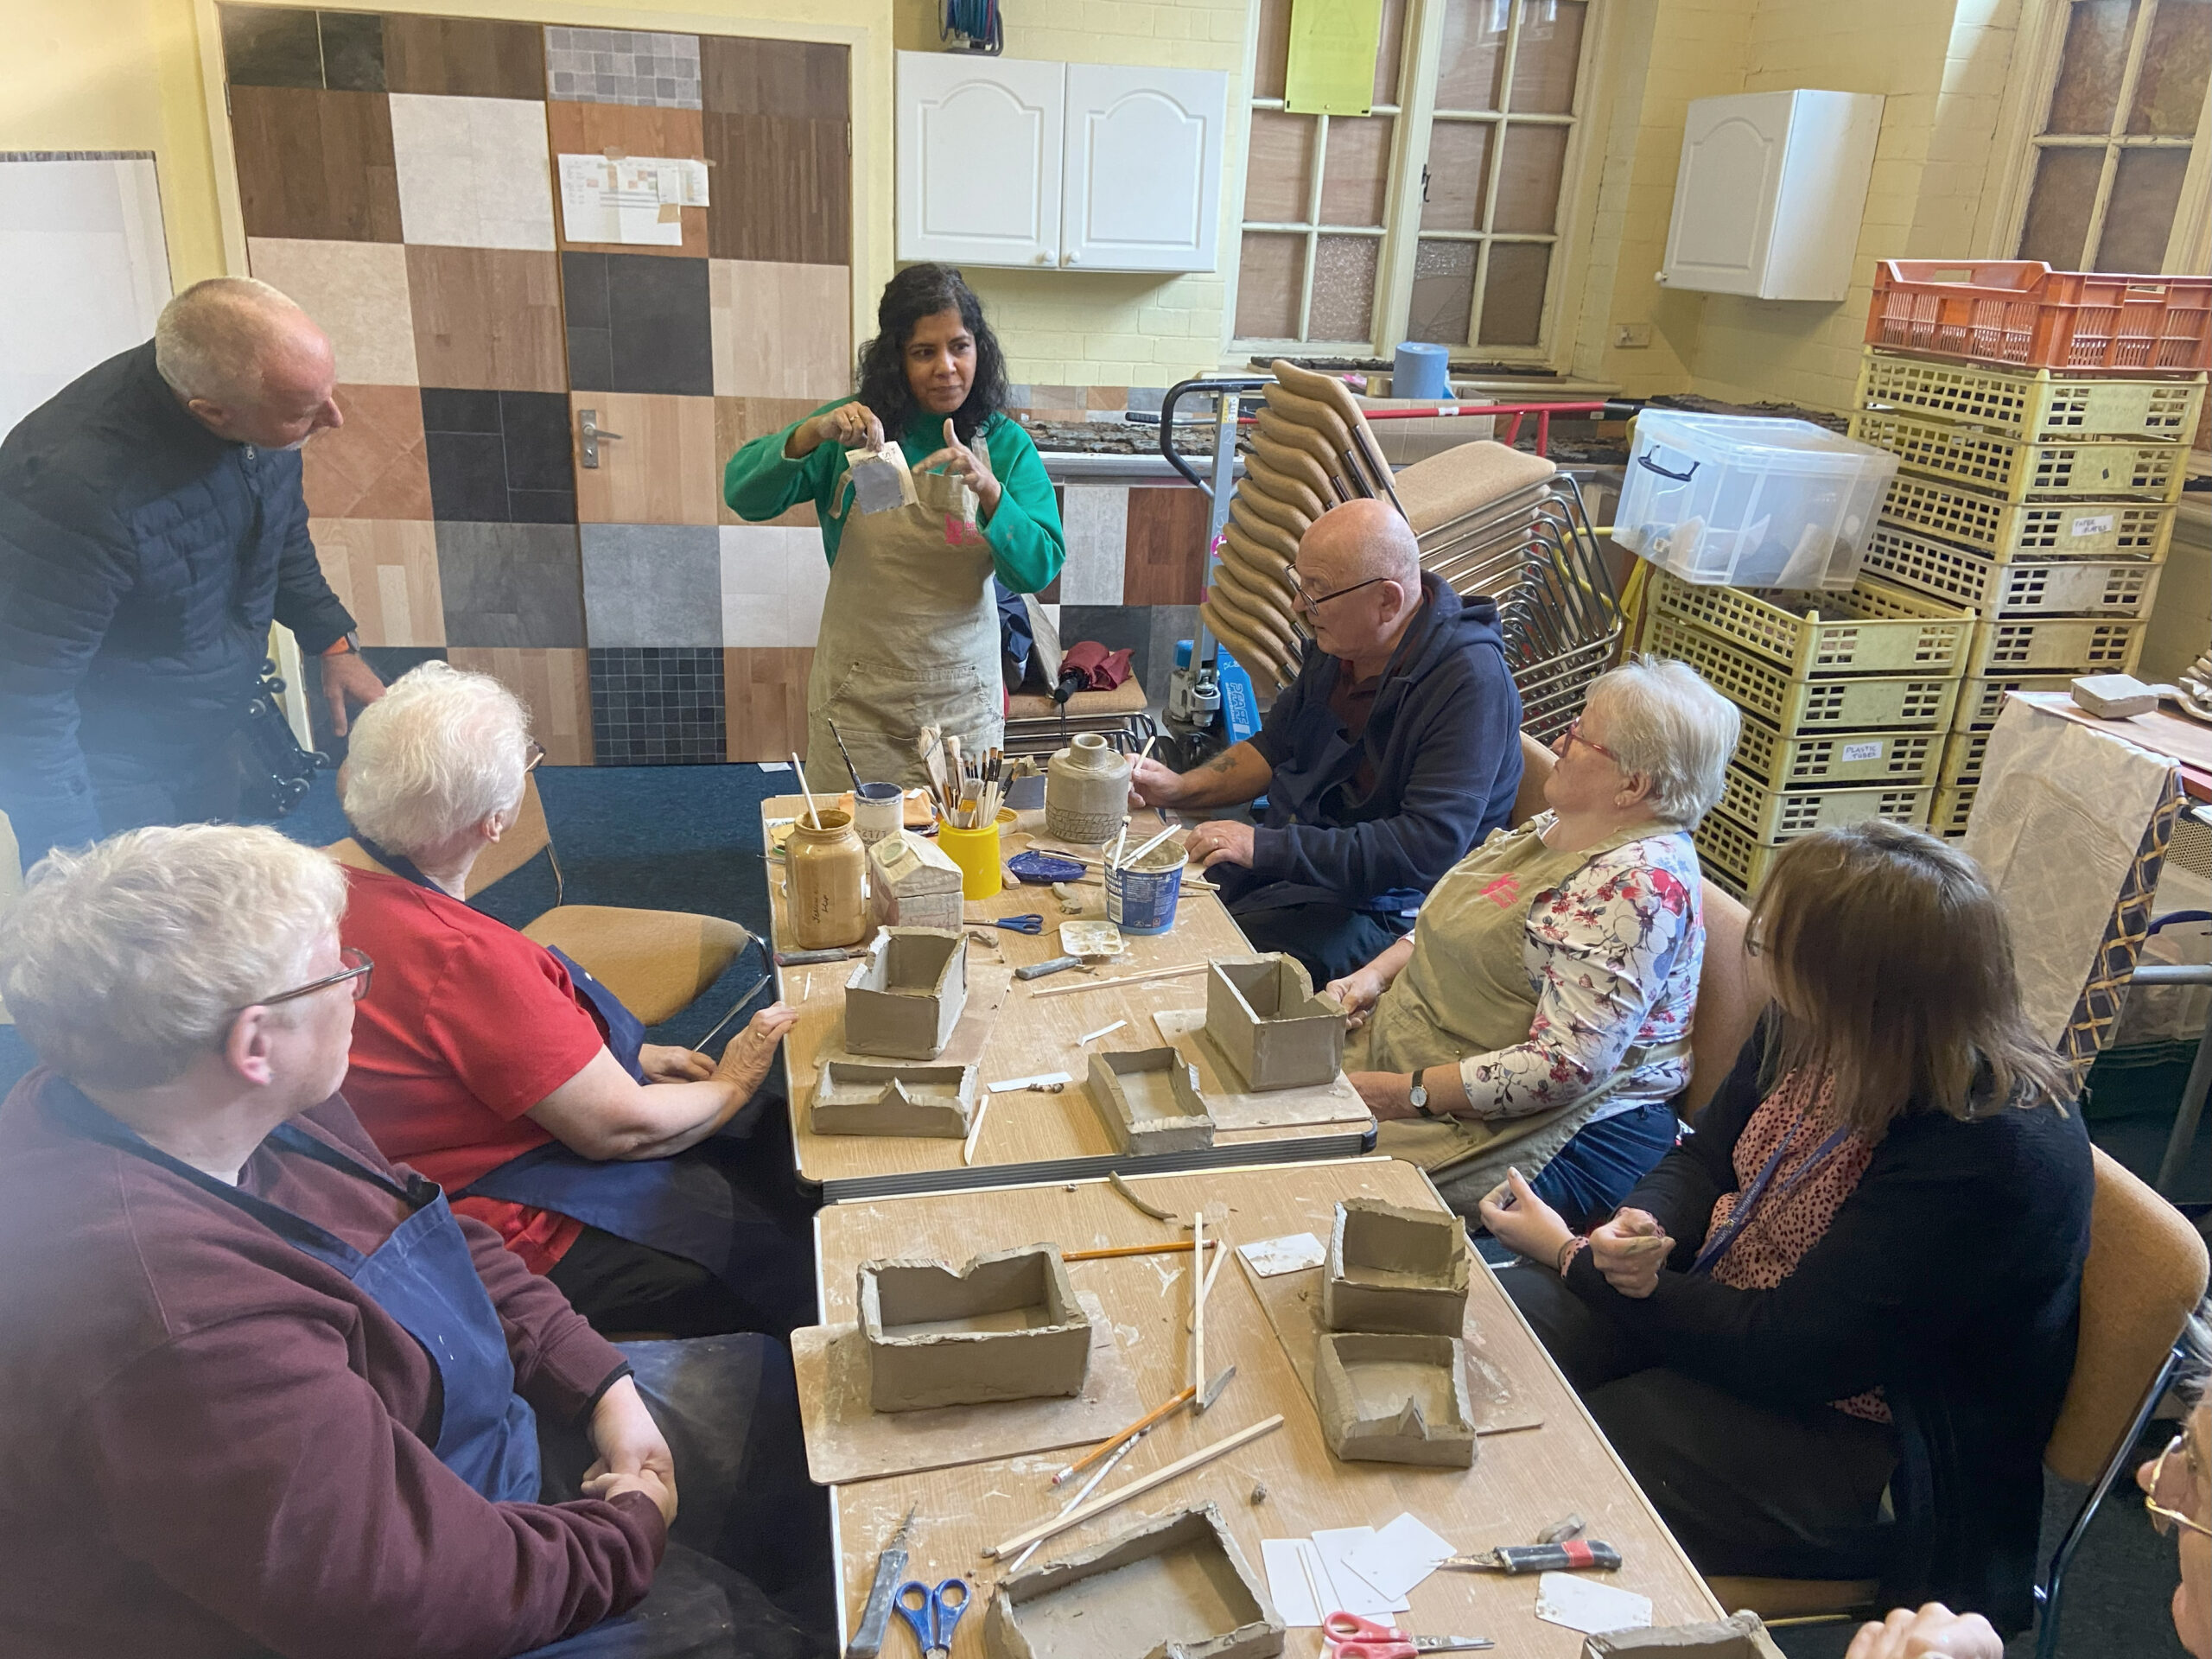 People sitting at a table taking part in a ceramics workshop